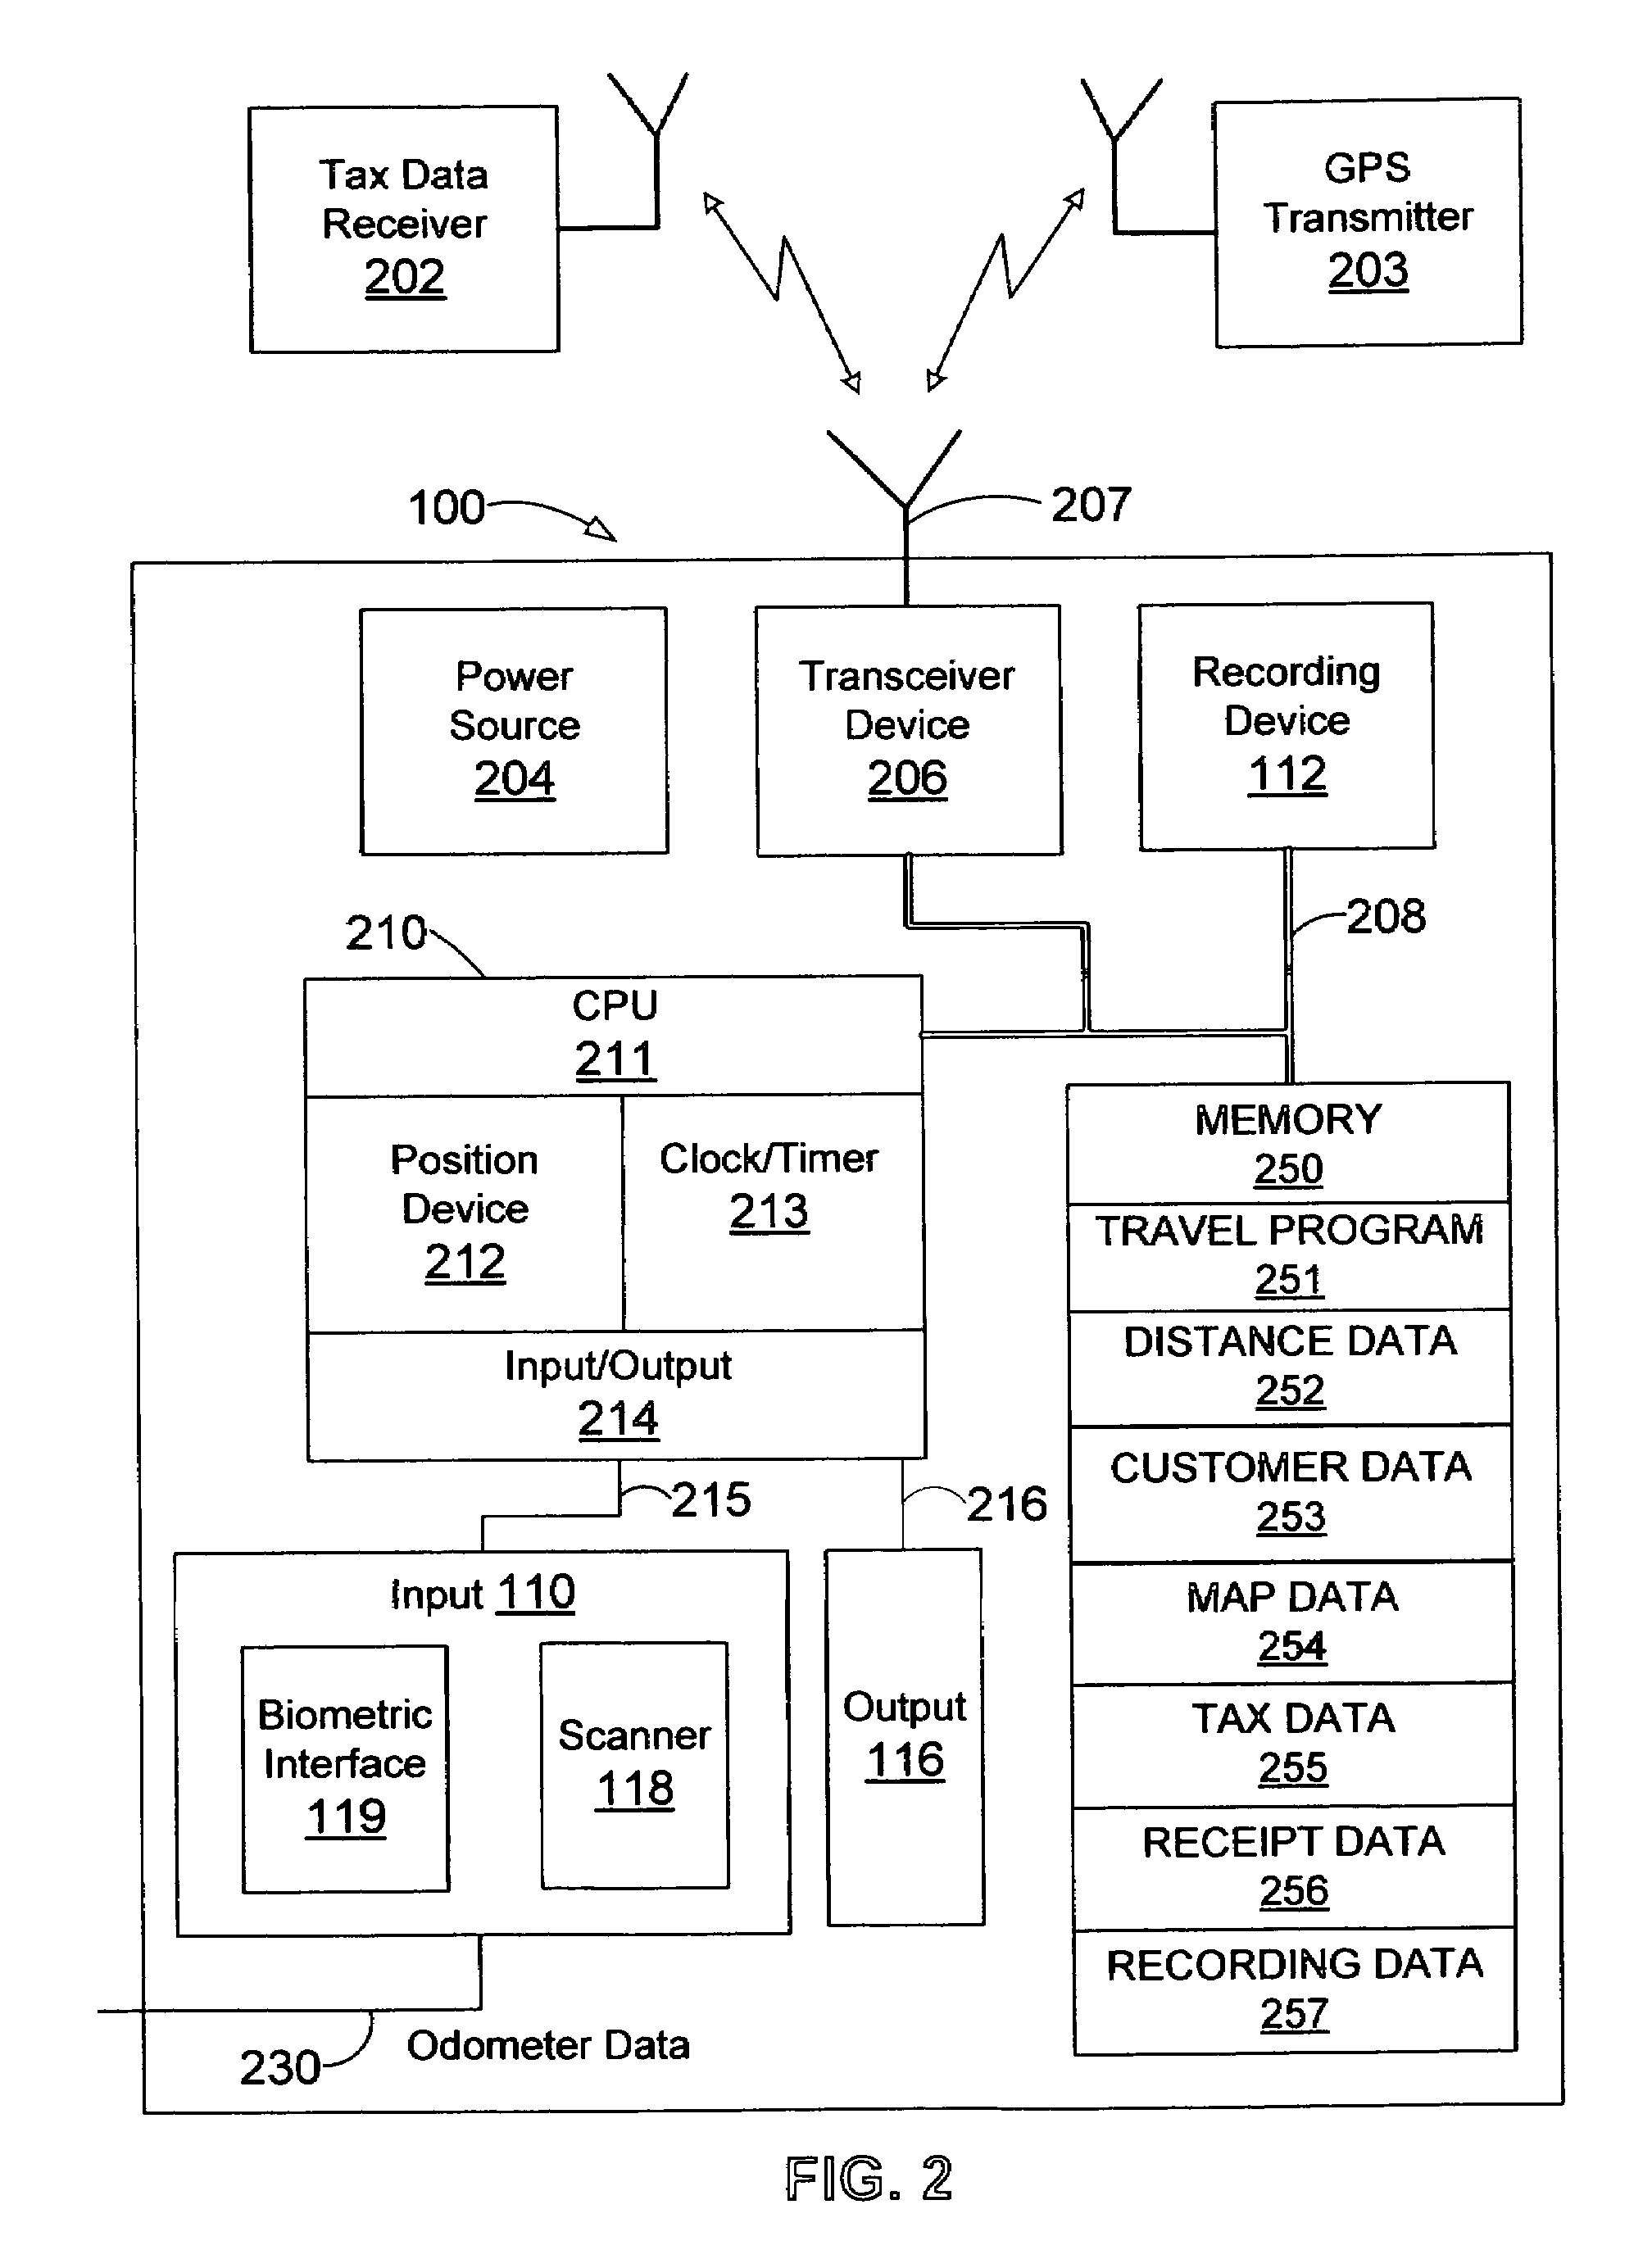 Apparatus and method for tracking vehicle travel and expenditures